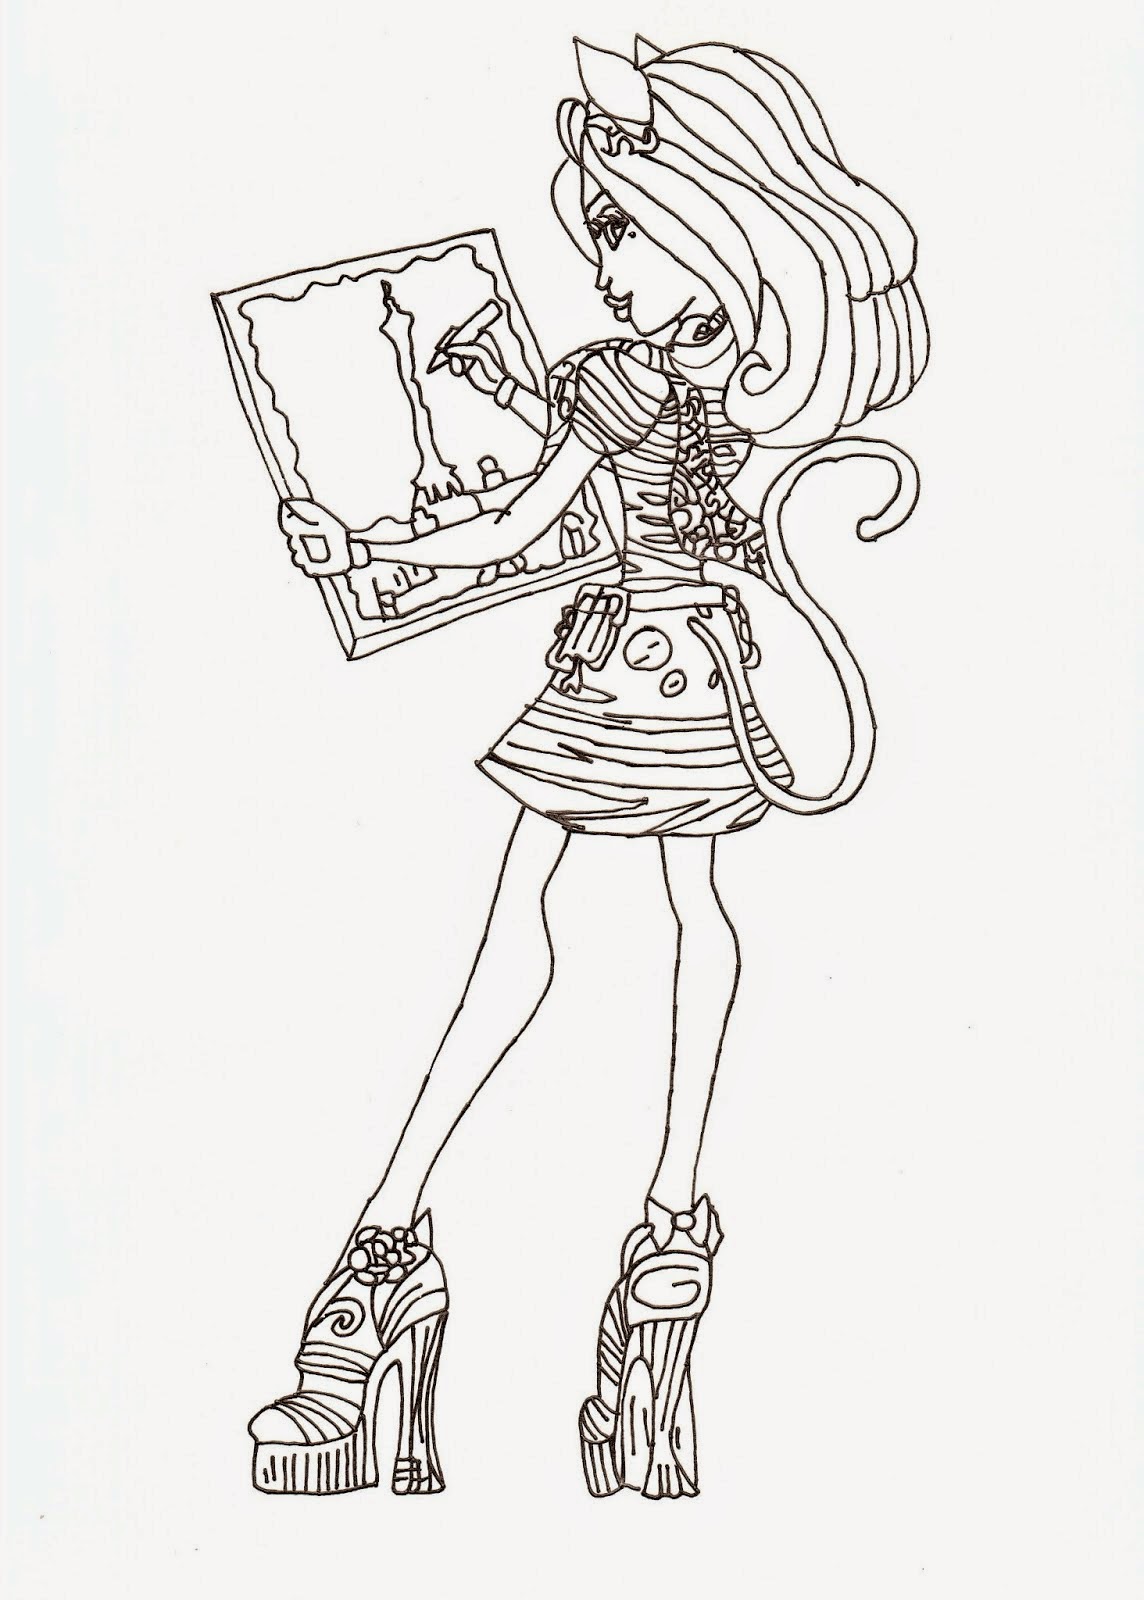 Coloring Pages: Monster High Coloring Pages Free and Printable